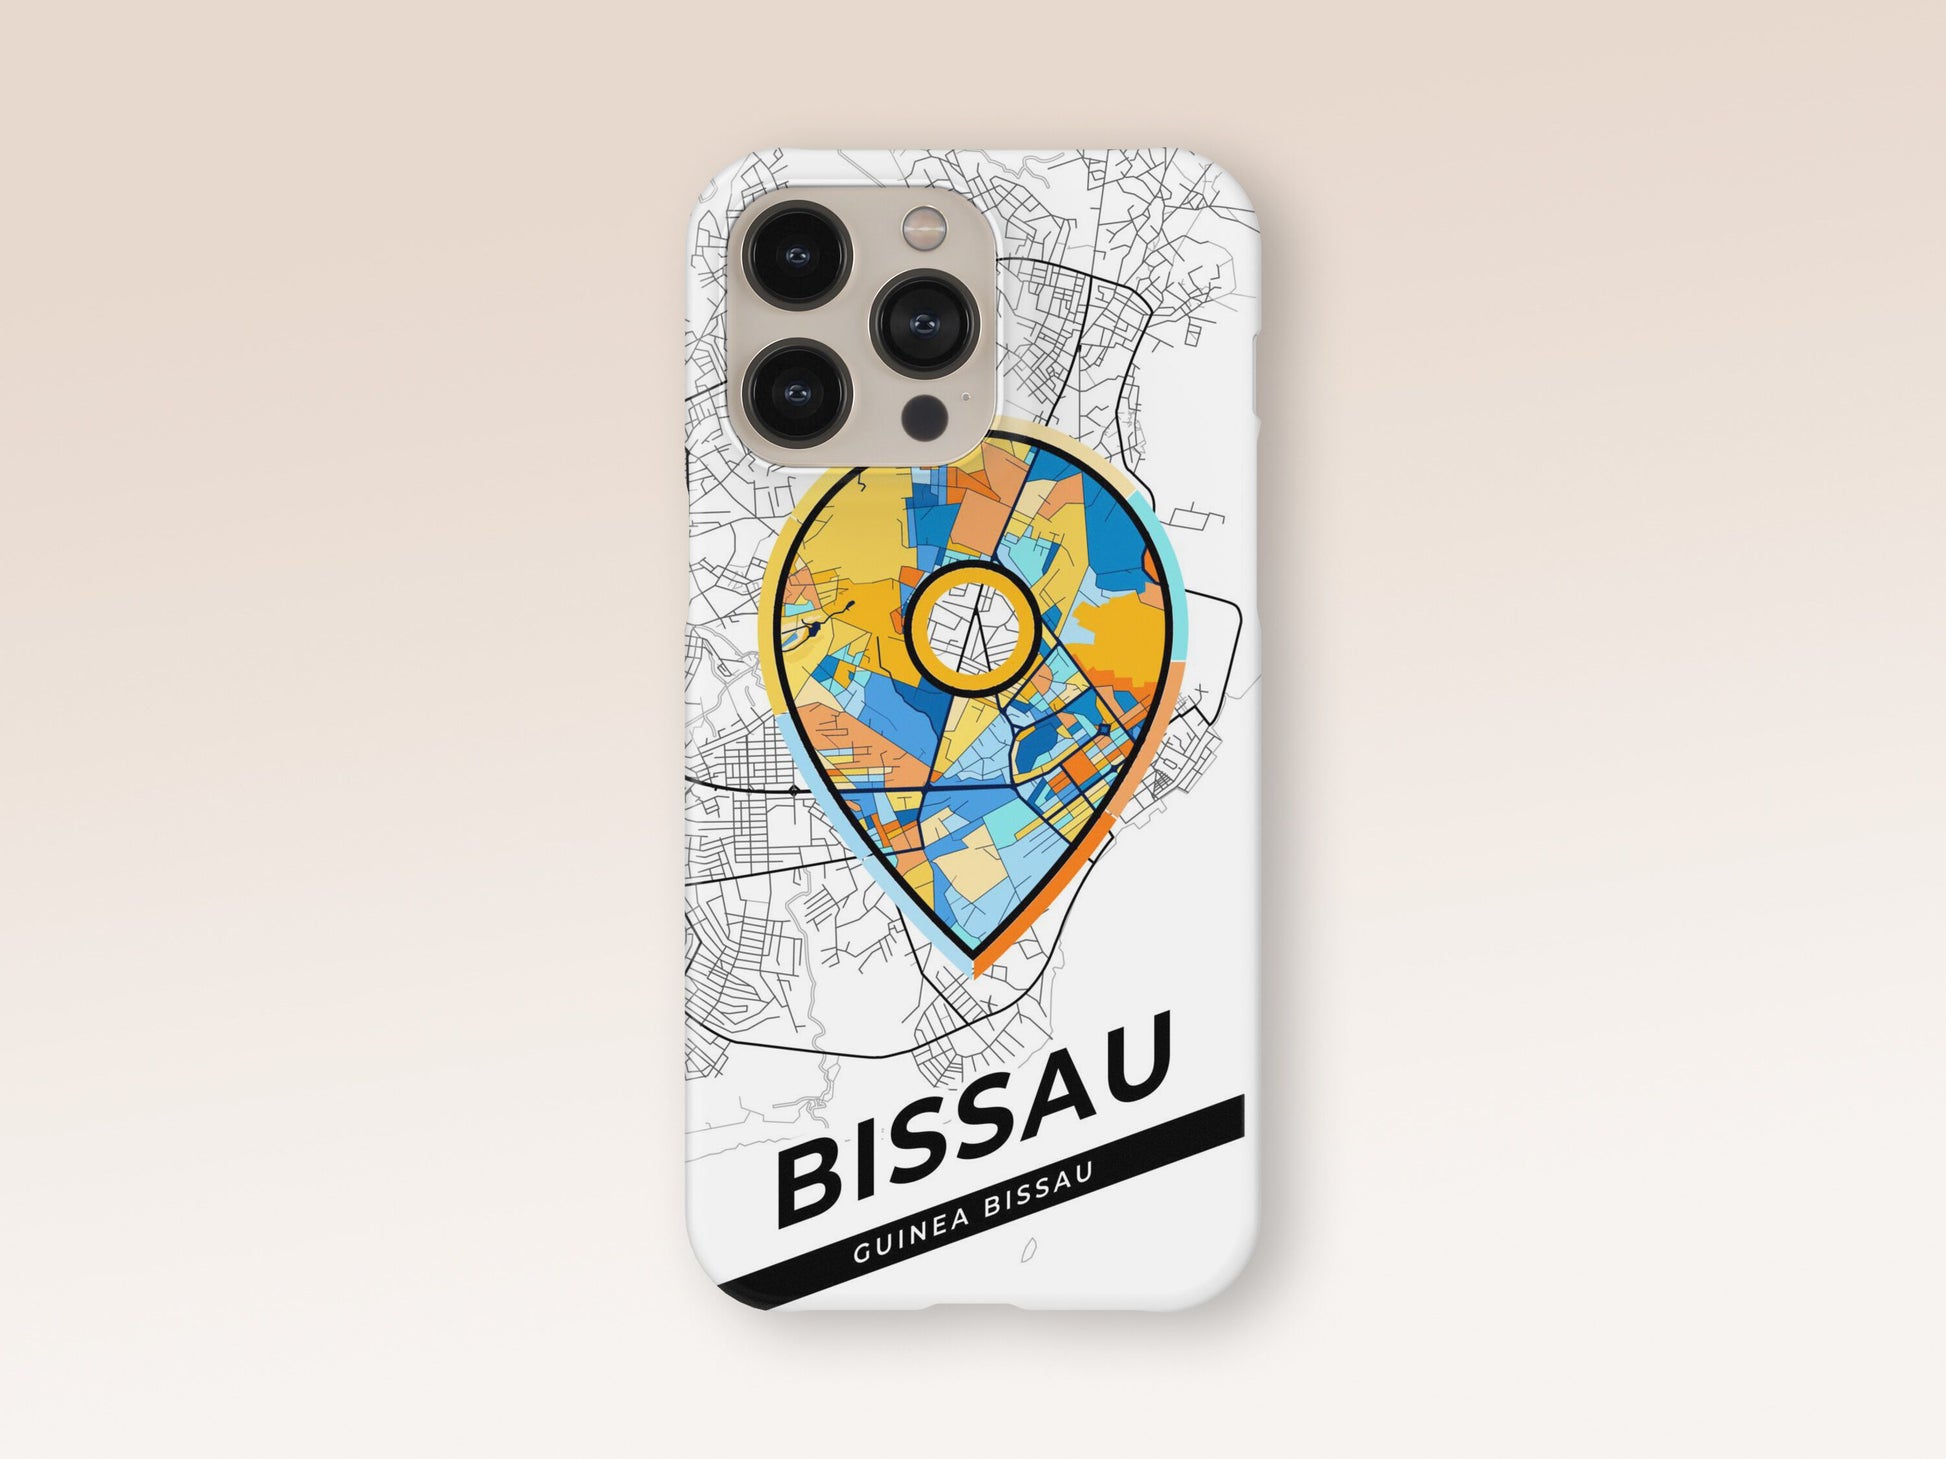 Bissau Guinea Bissau slim phone case with colorful icon. Birthday, wedding or housewarming gift. Couple match cases. 1